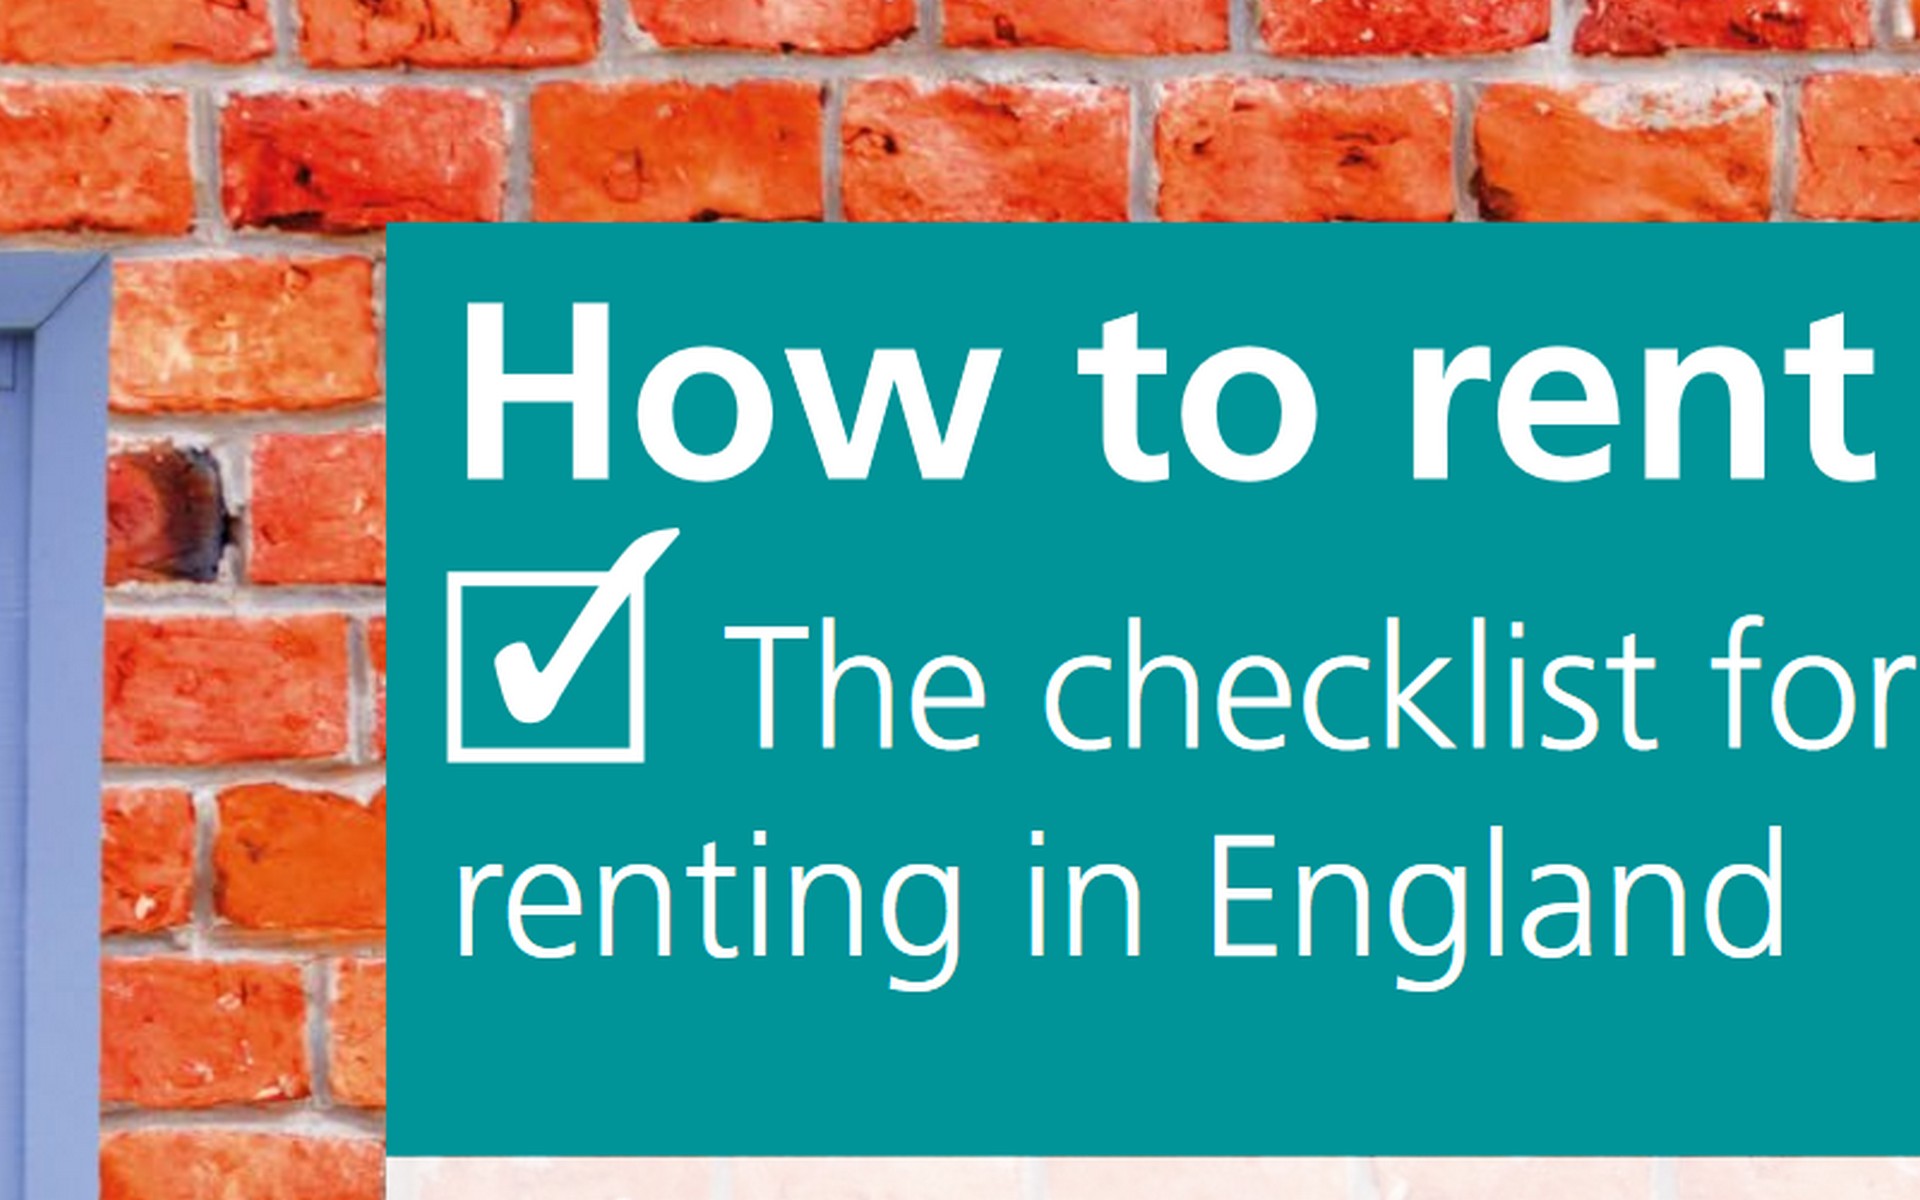 how-to-rent-checklist-for-renting-news-alex-neil